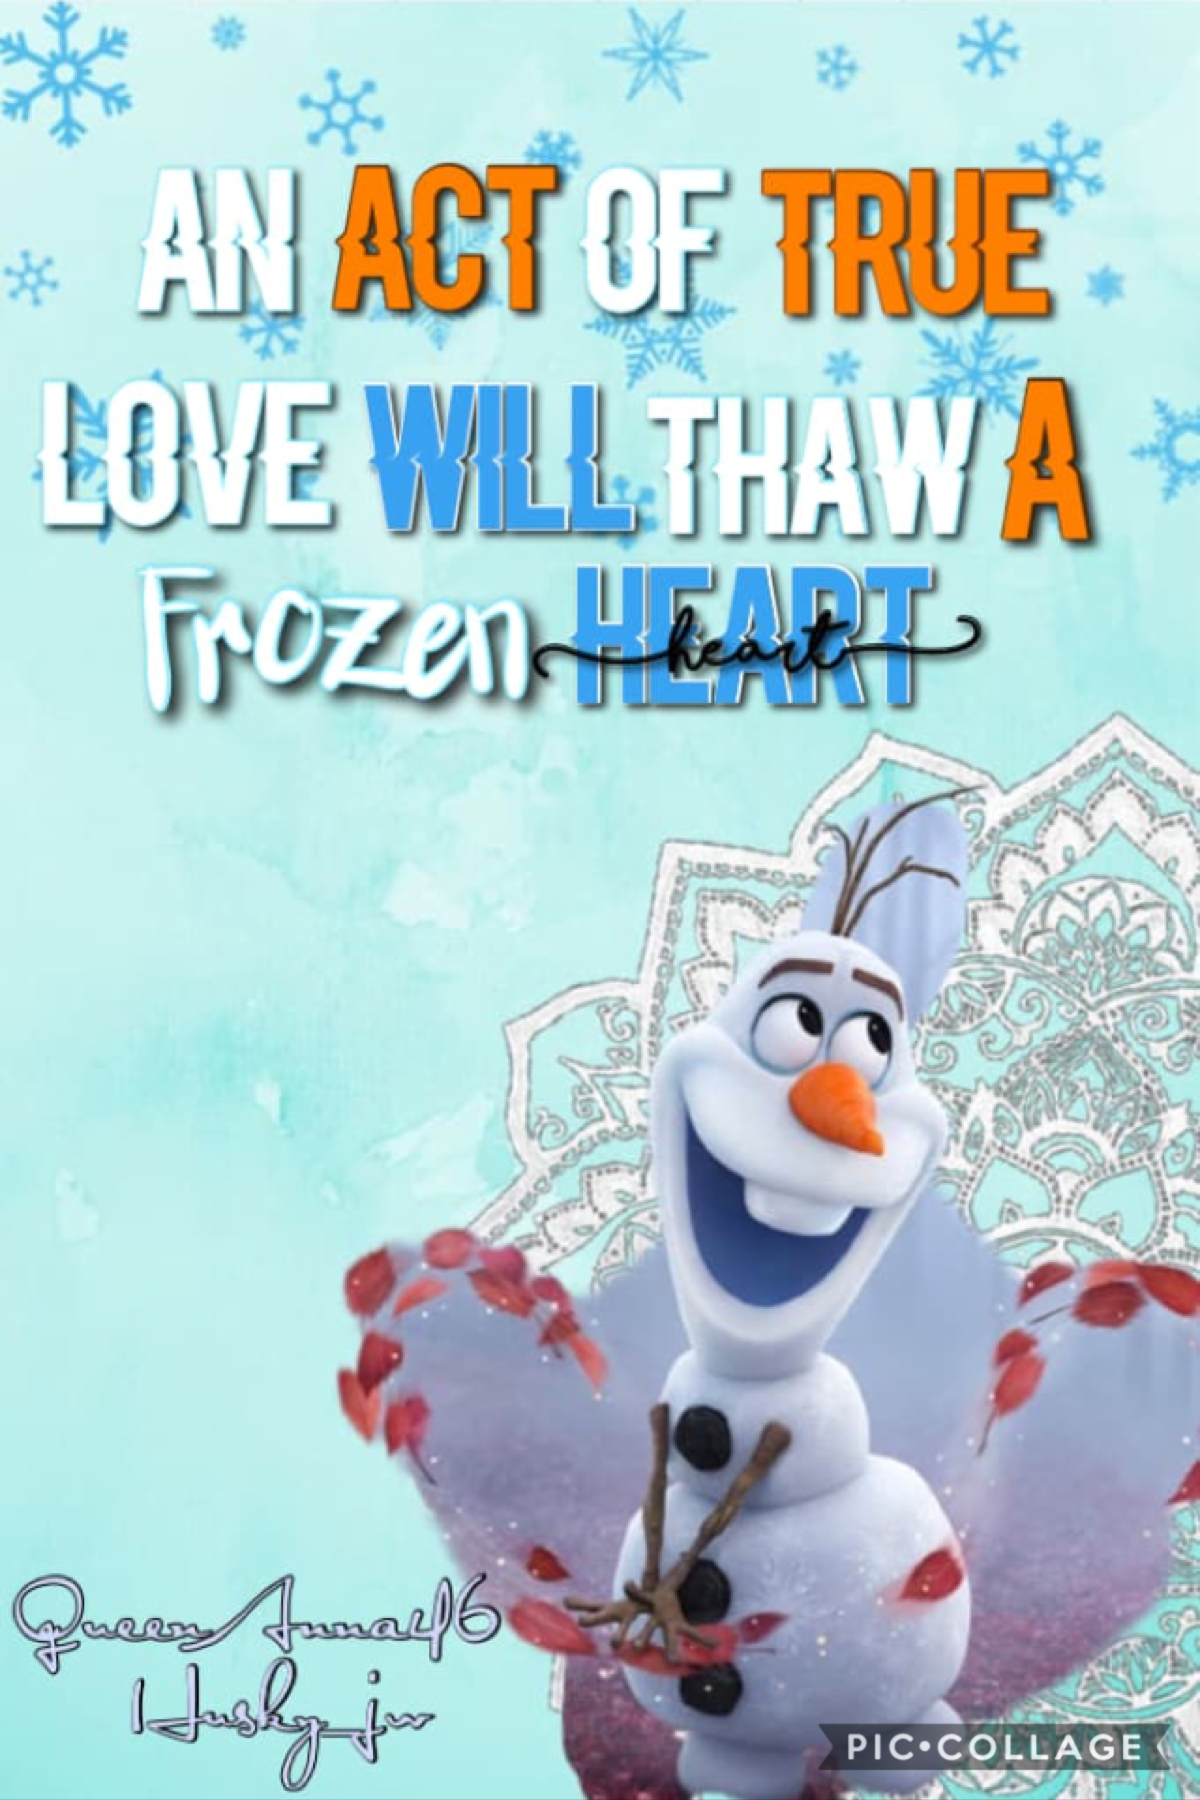 Olaf frozen collaboration with Husky_jw